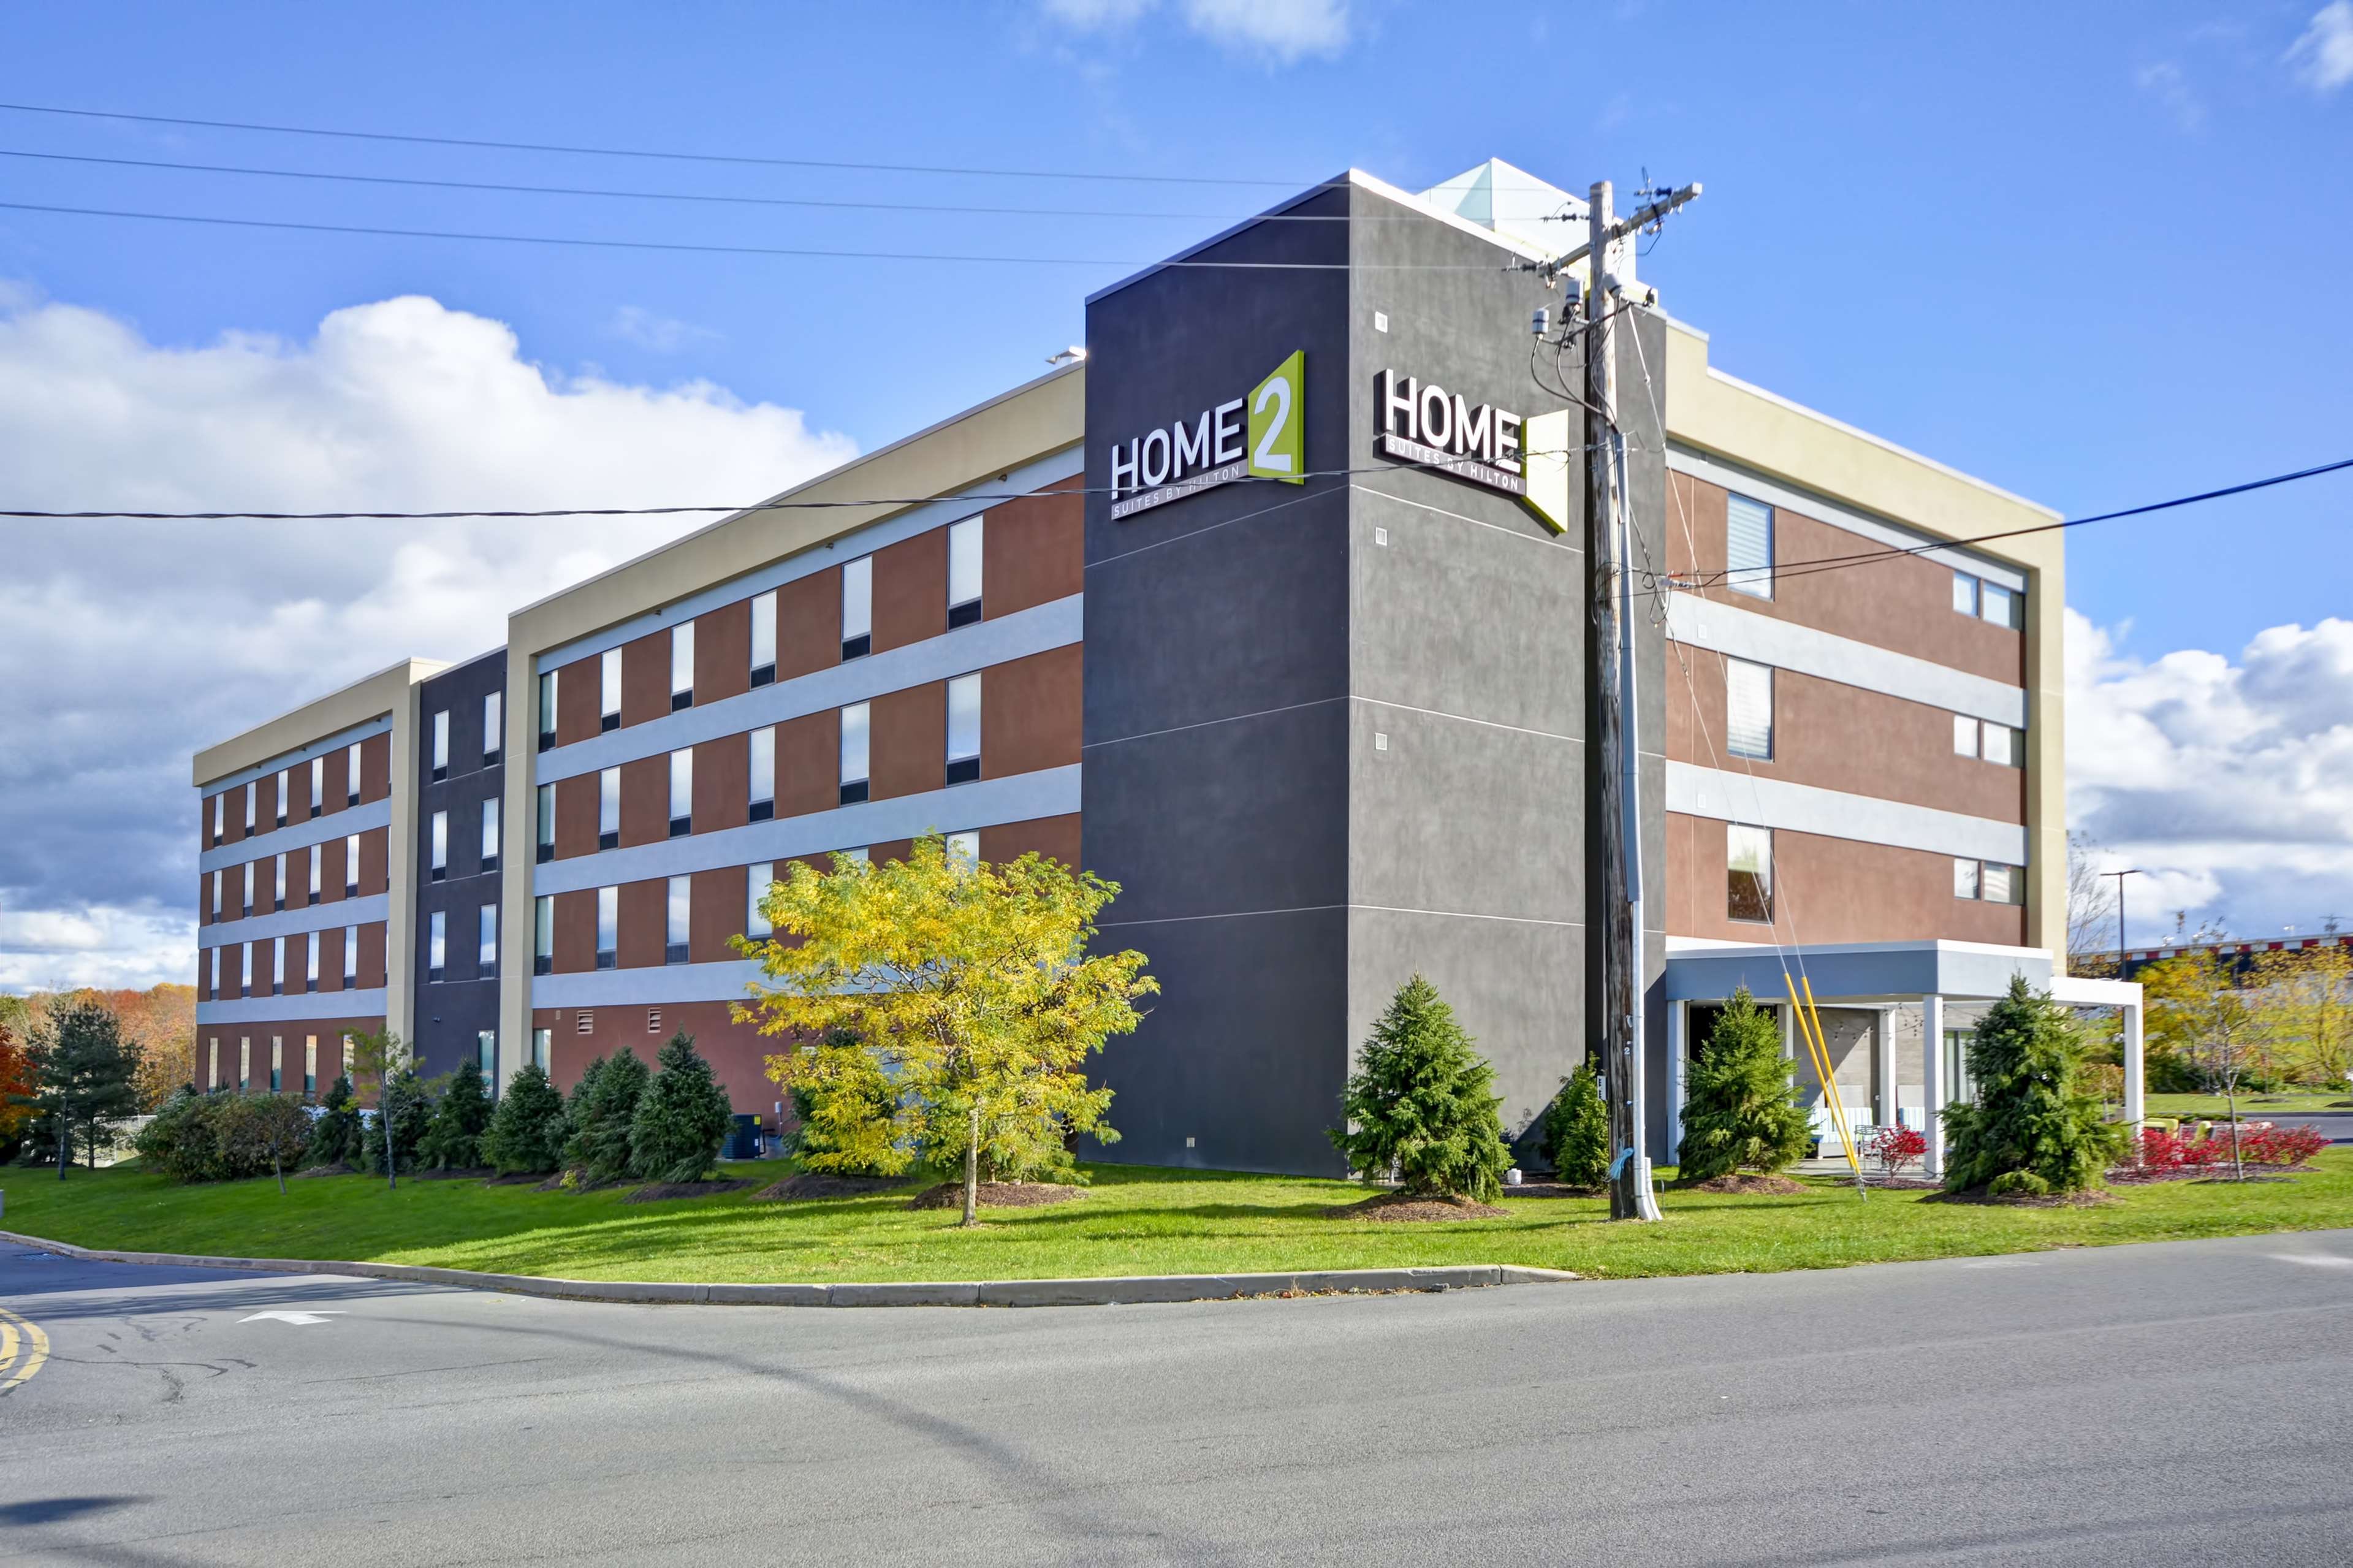 Home2 Suites by Hilton Oswego image